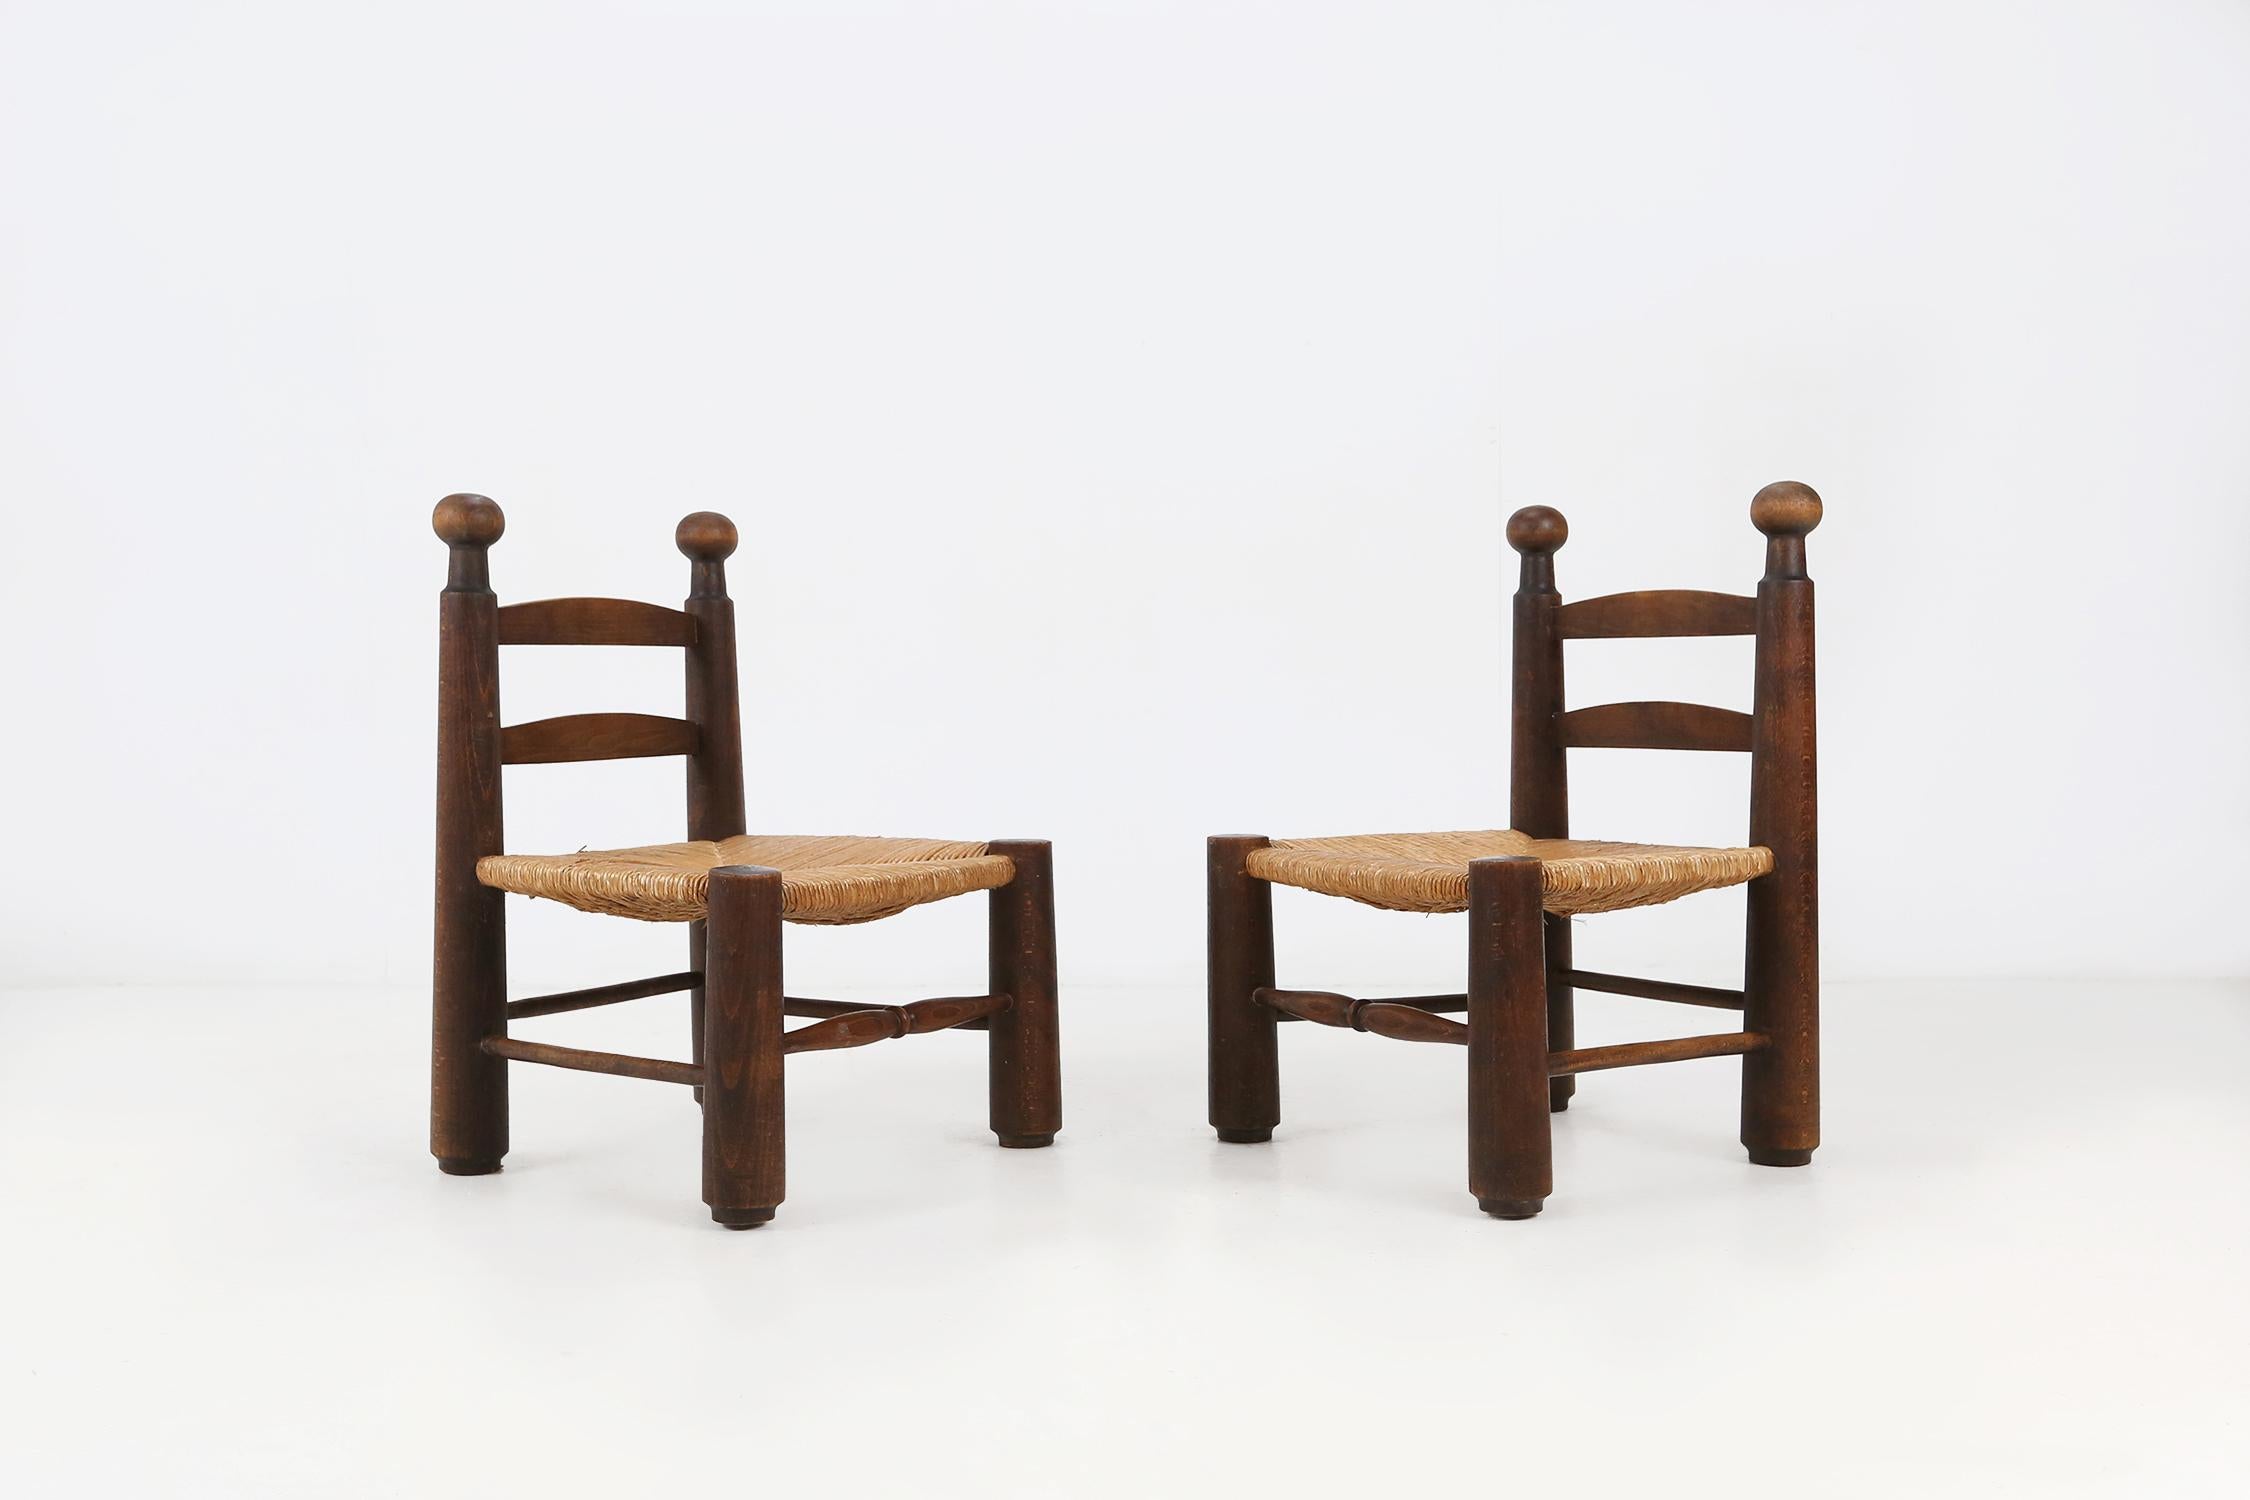 Set of two low side chairs by French designer Charles Dudouyt, 1940's.
Made of solid wood an wicker seat.